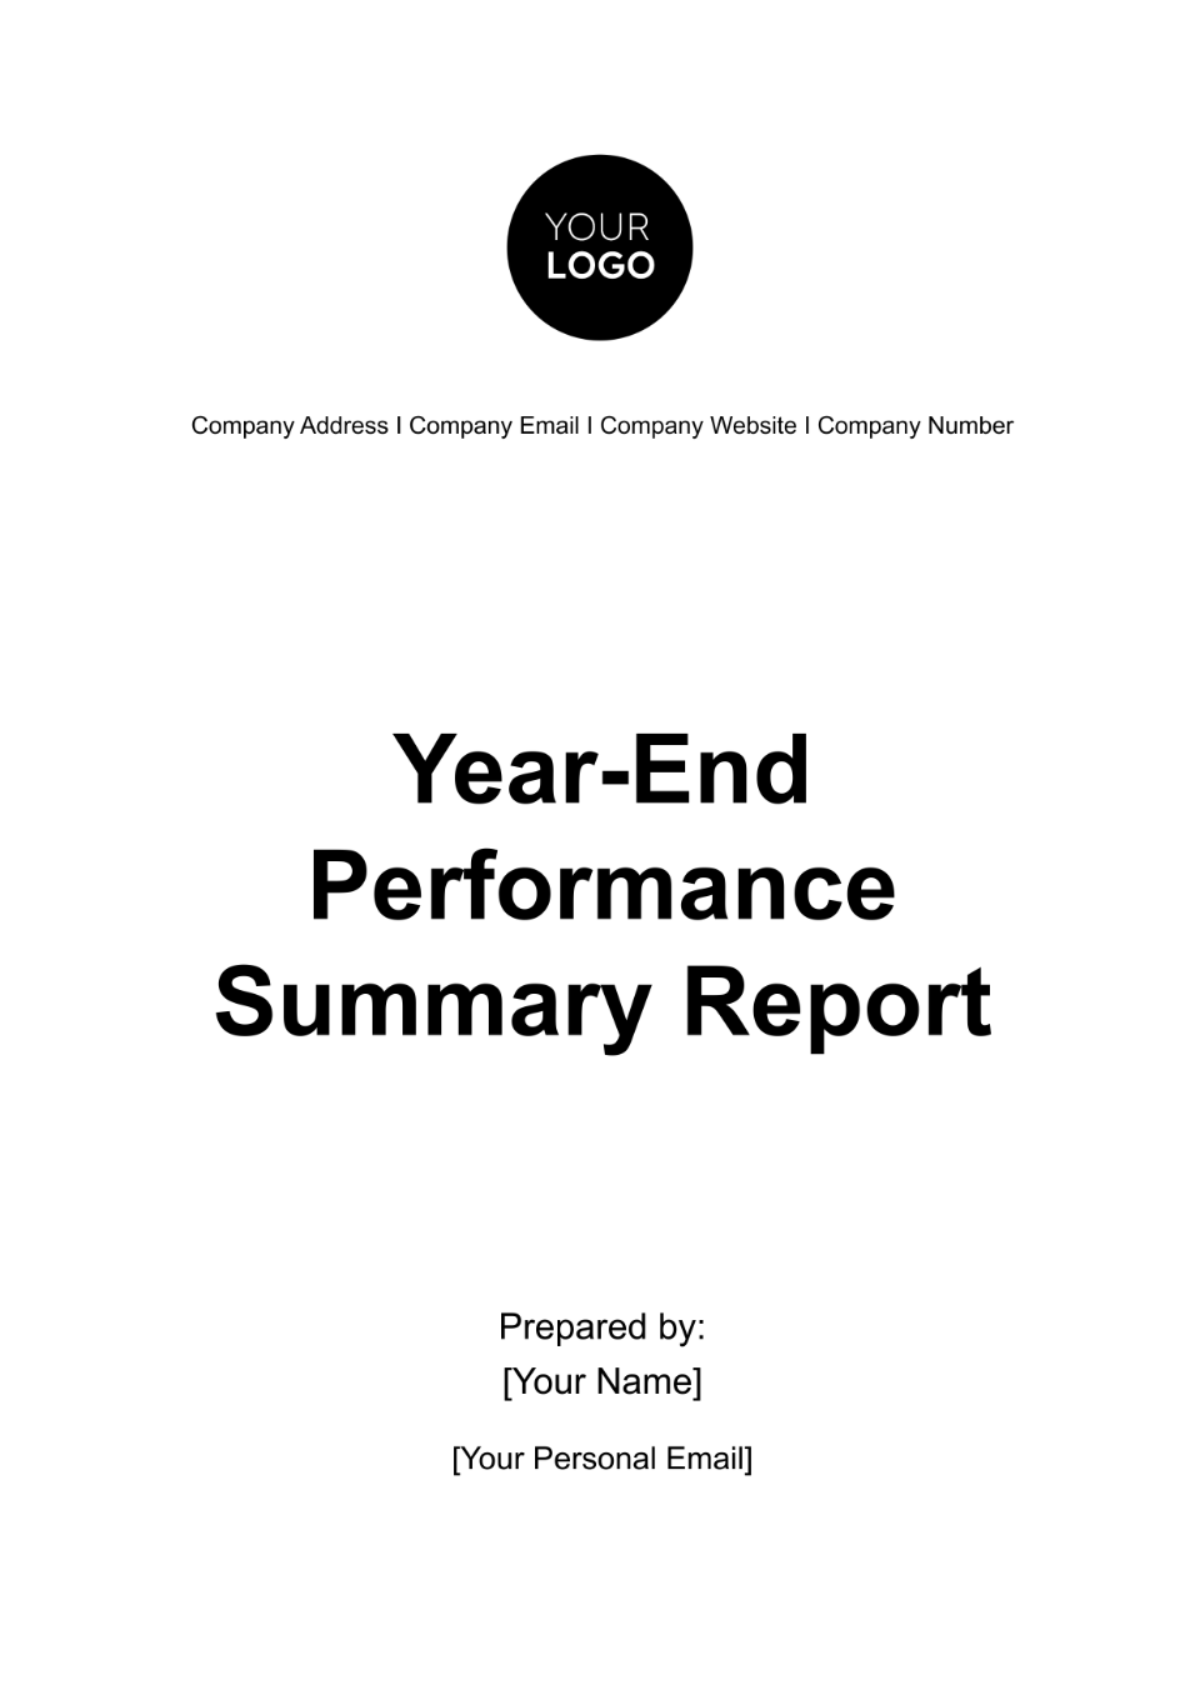 Free Year-End Performance Summary Report HR Template